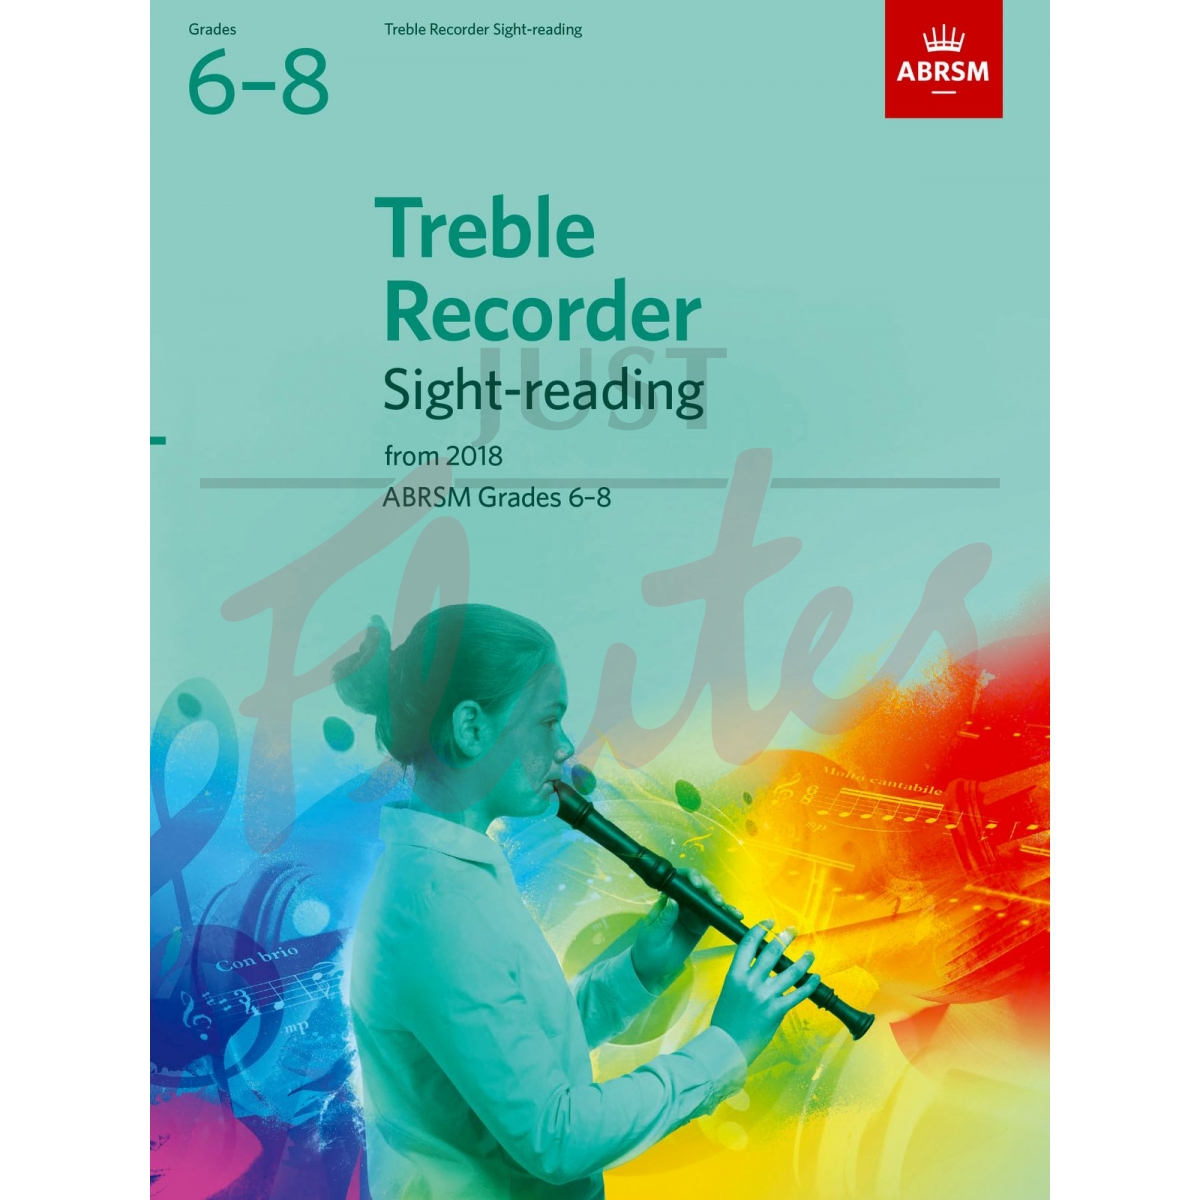 Sight-Reading Tests Grades 6-8 (from 2018) [Treble Recorder]